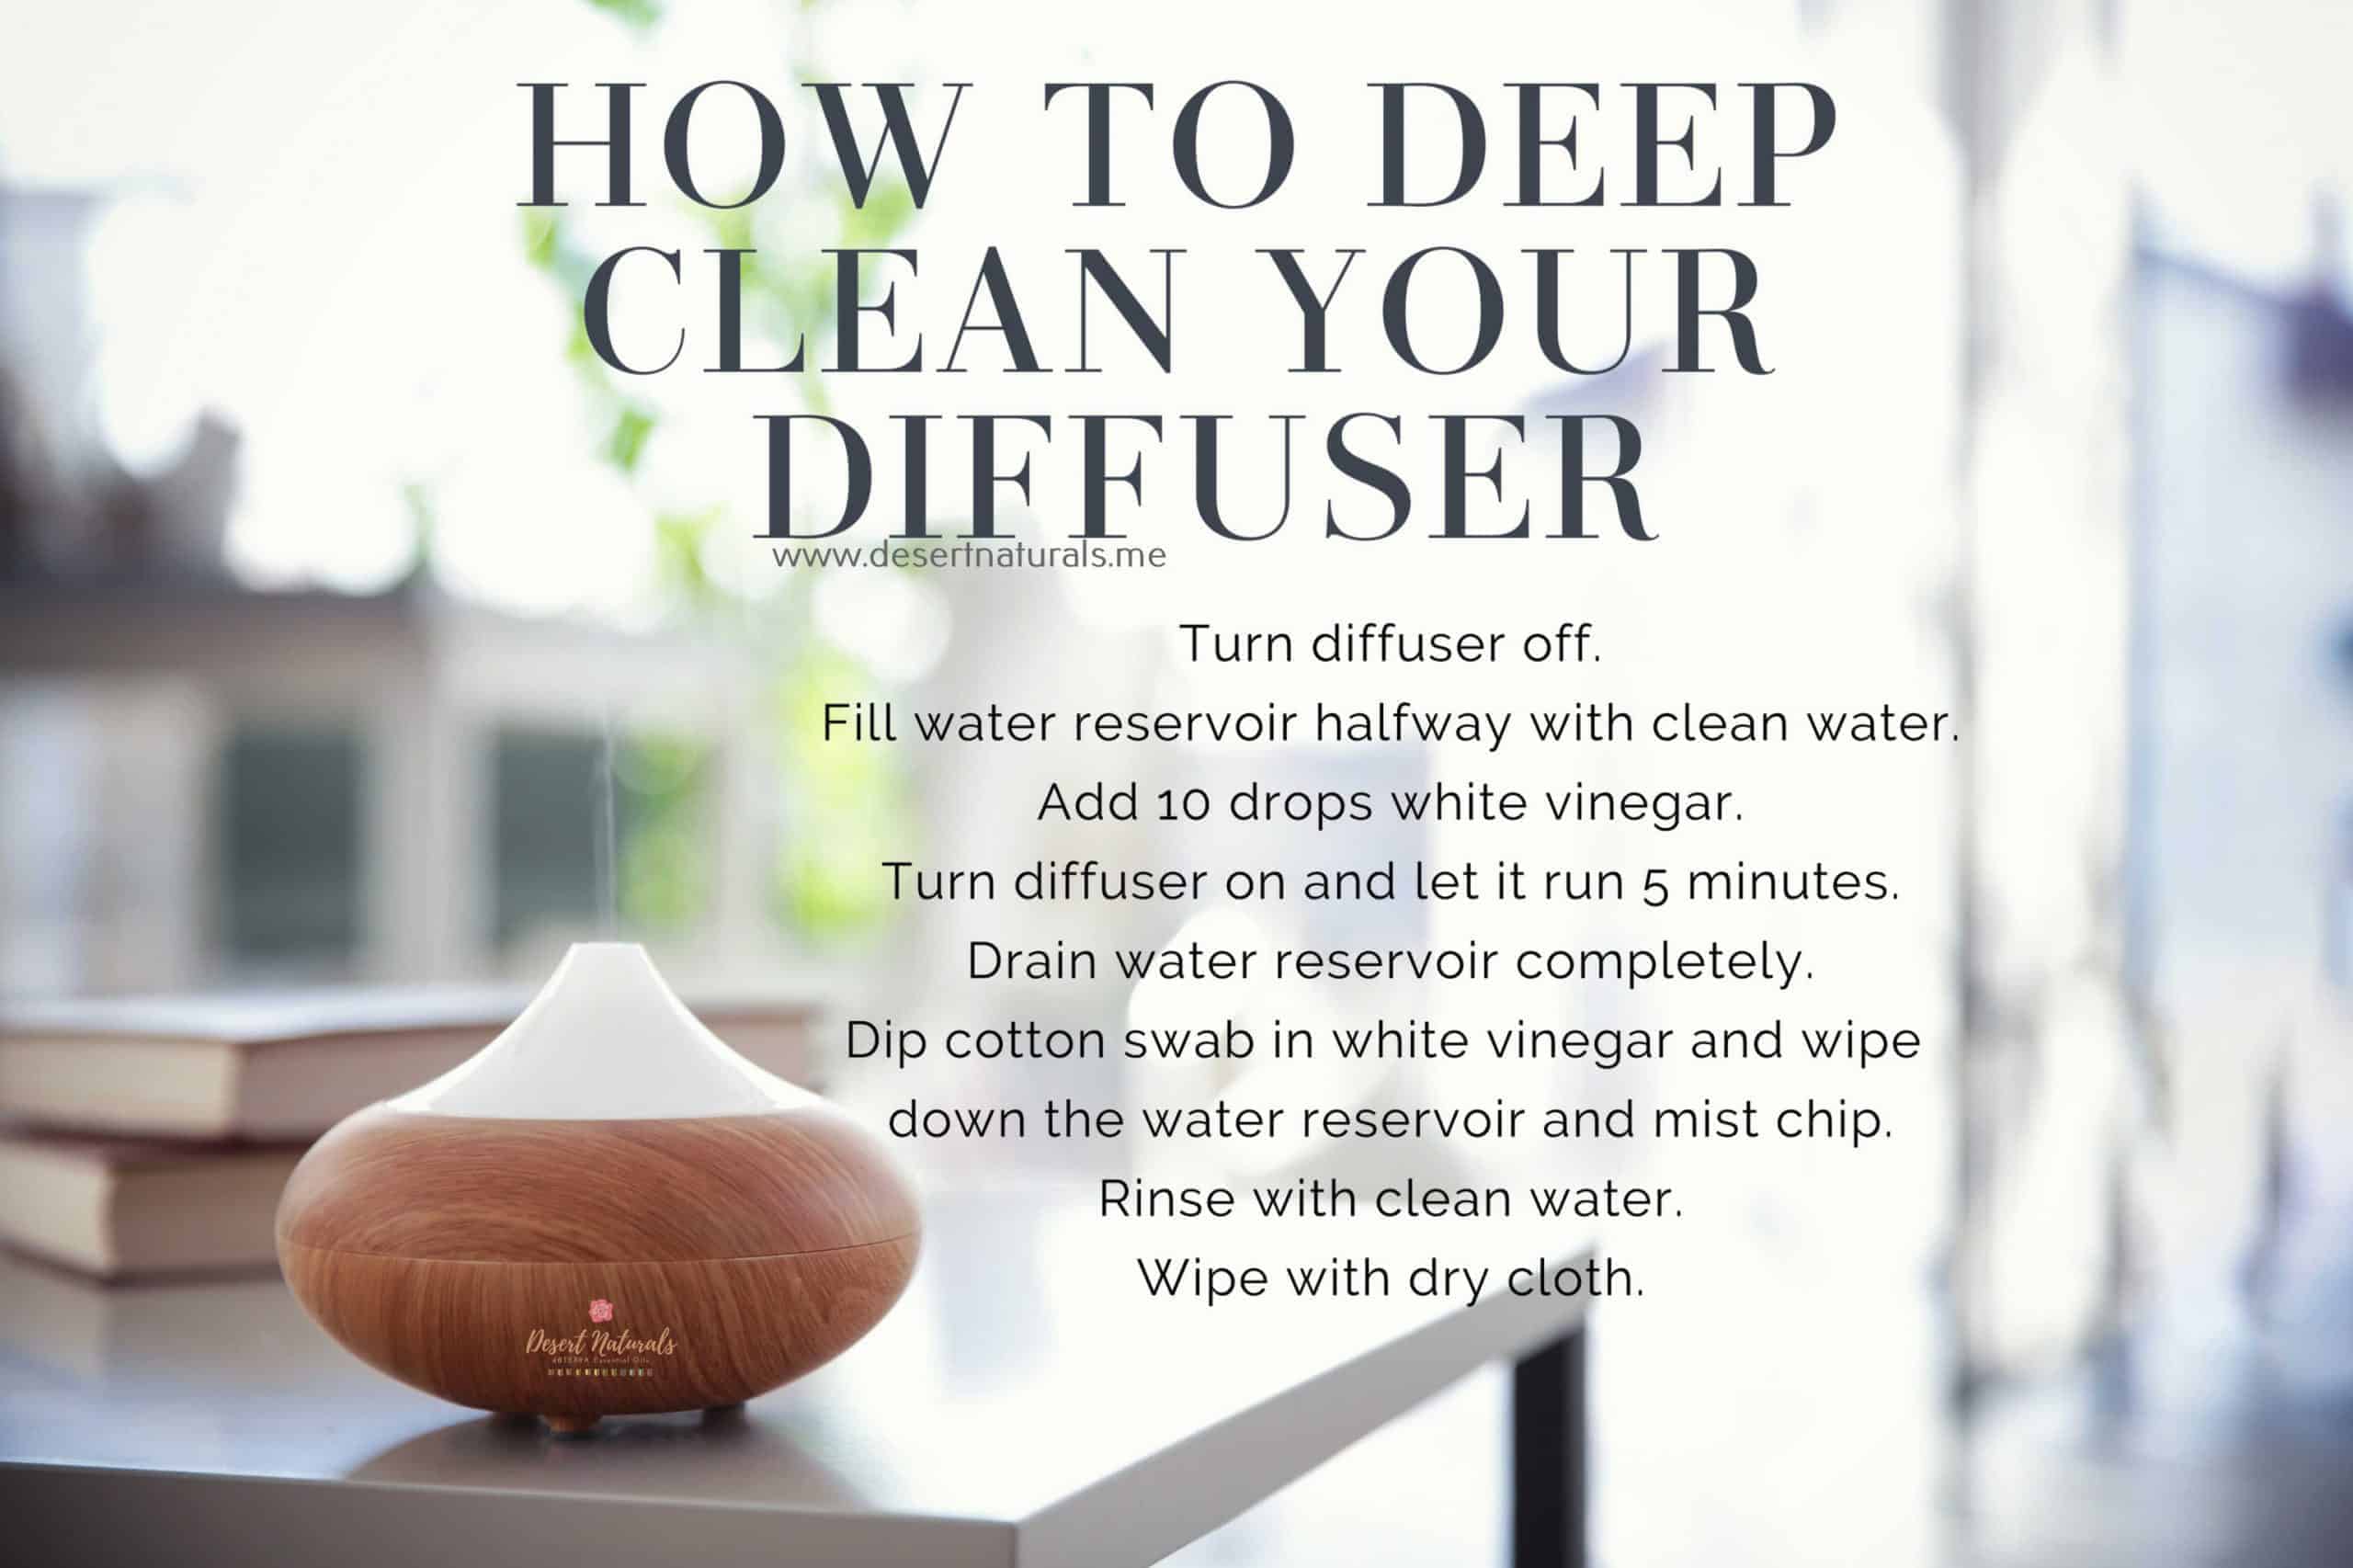 How to Deep Clean your essential oil diffuser